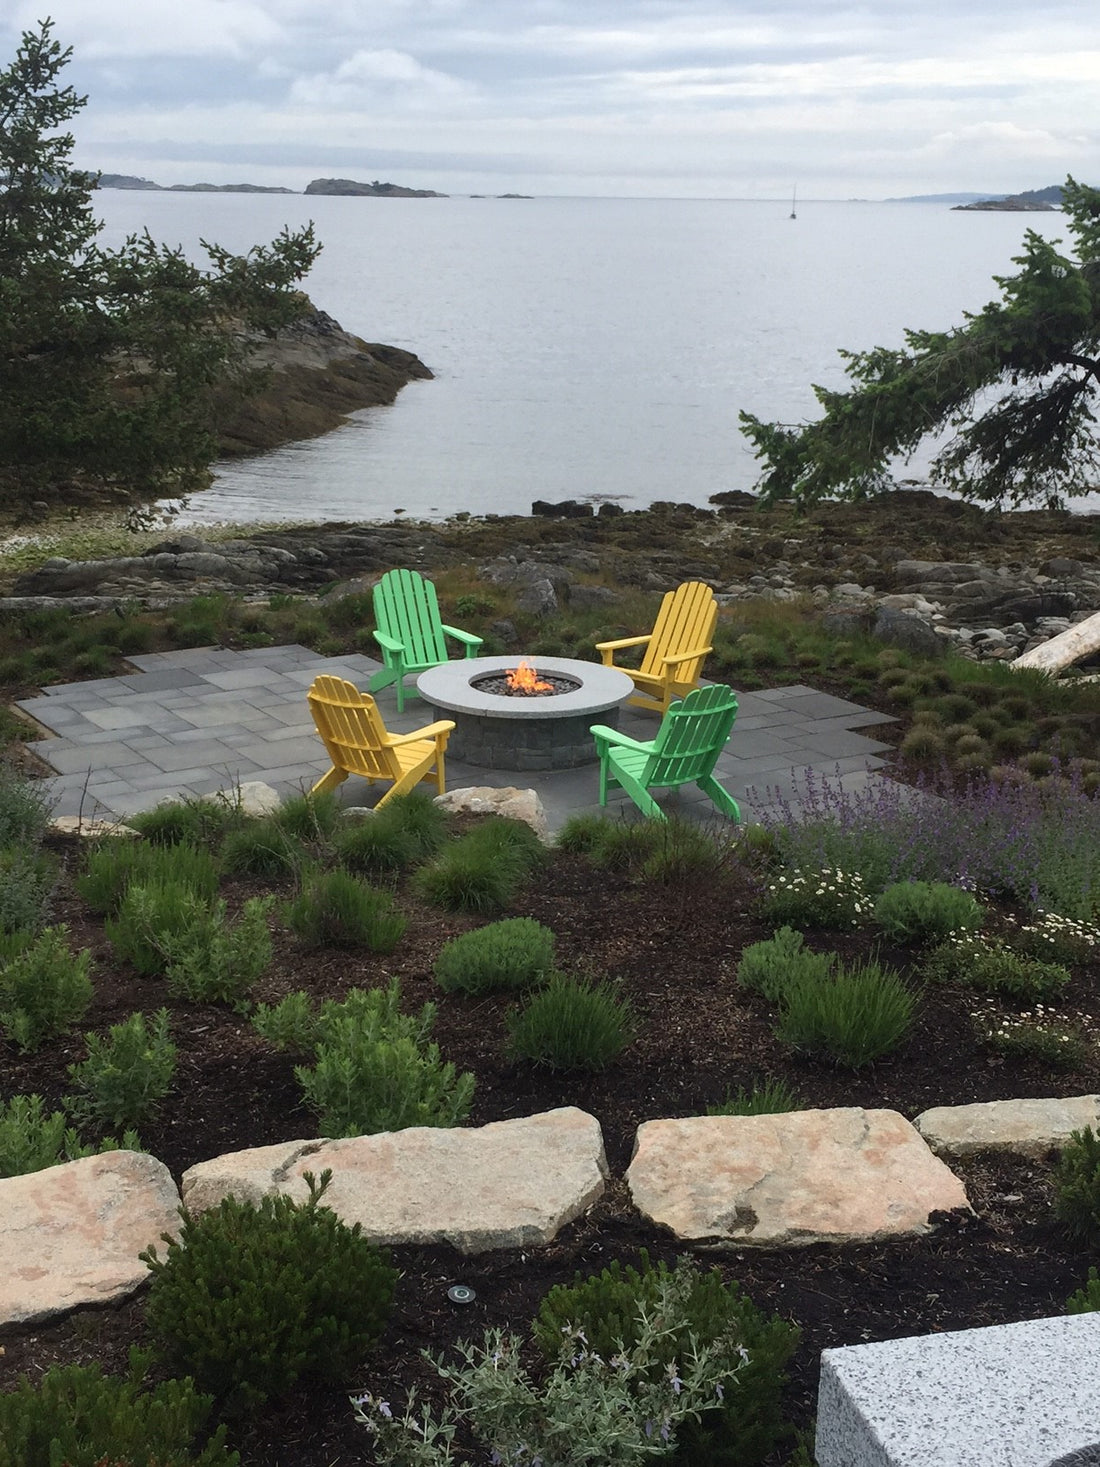 Lakefront Fire Pit Area | Customer Photos